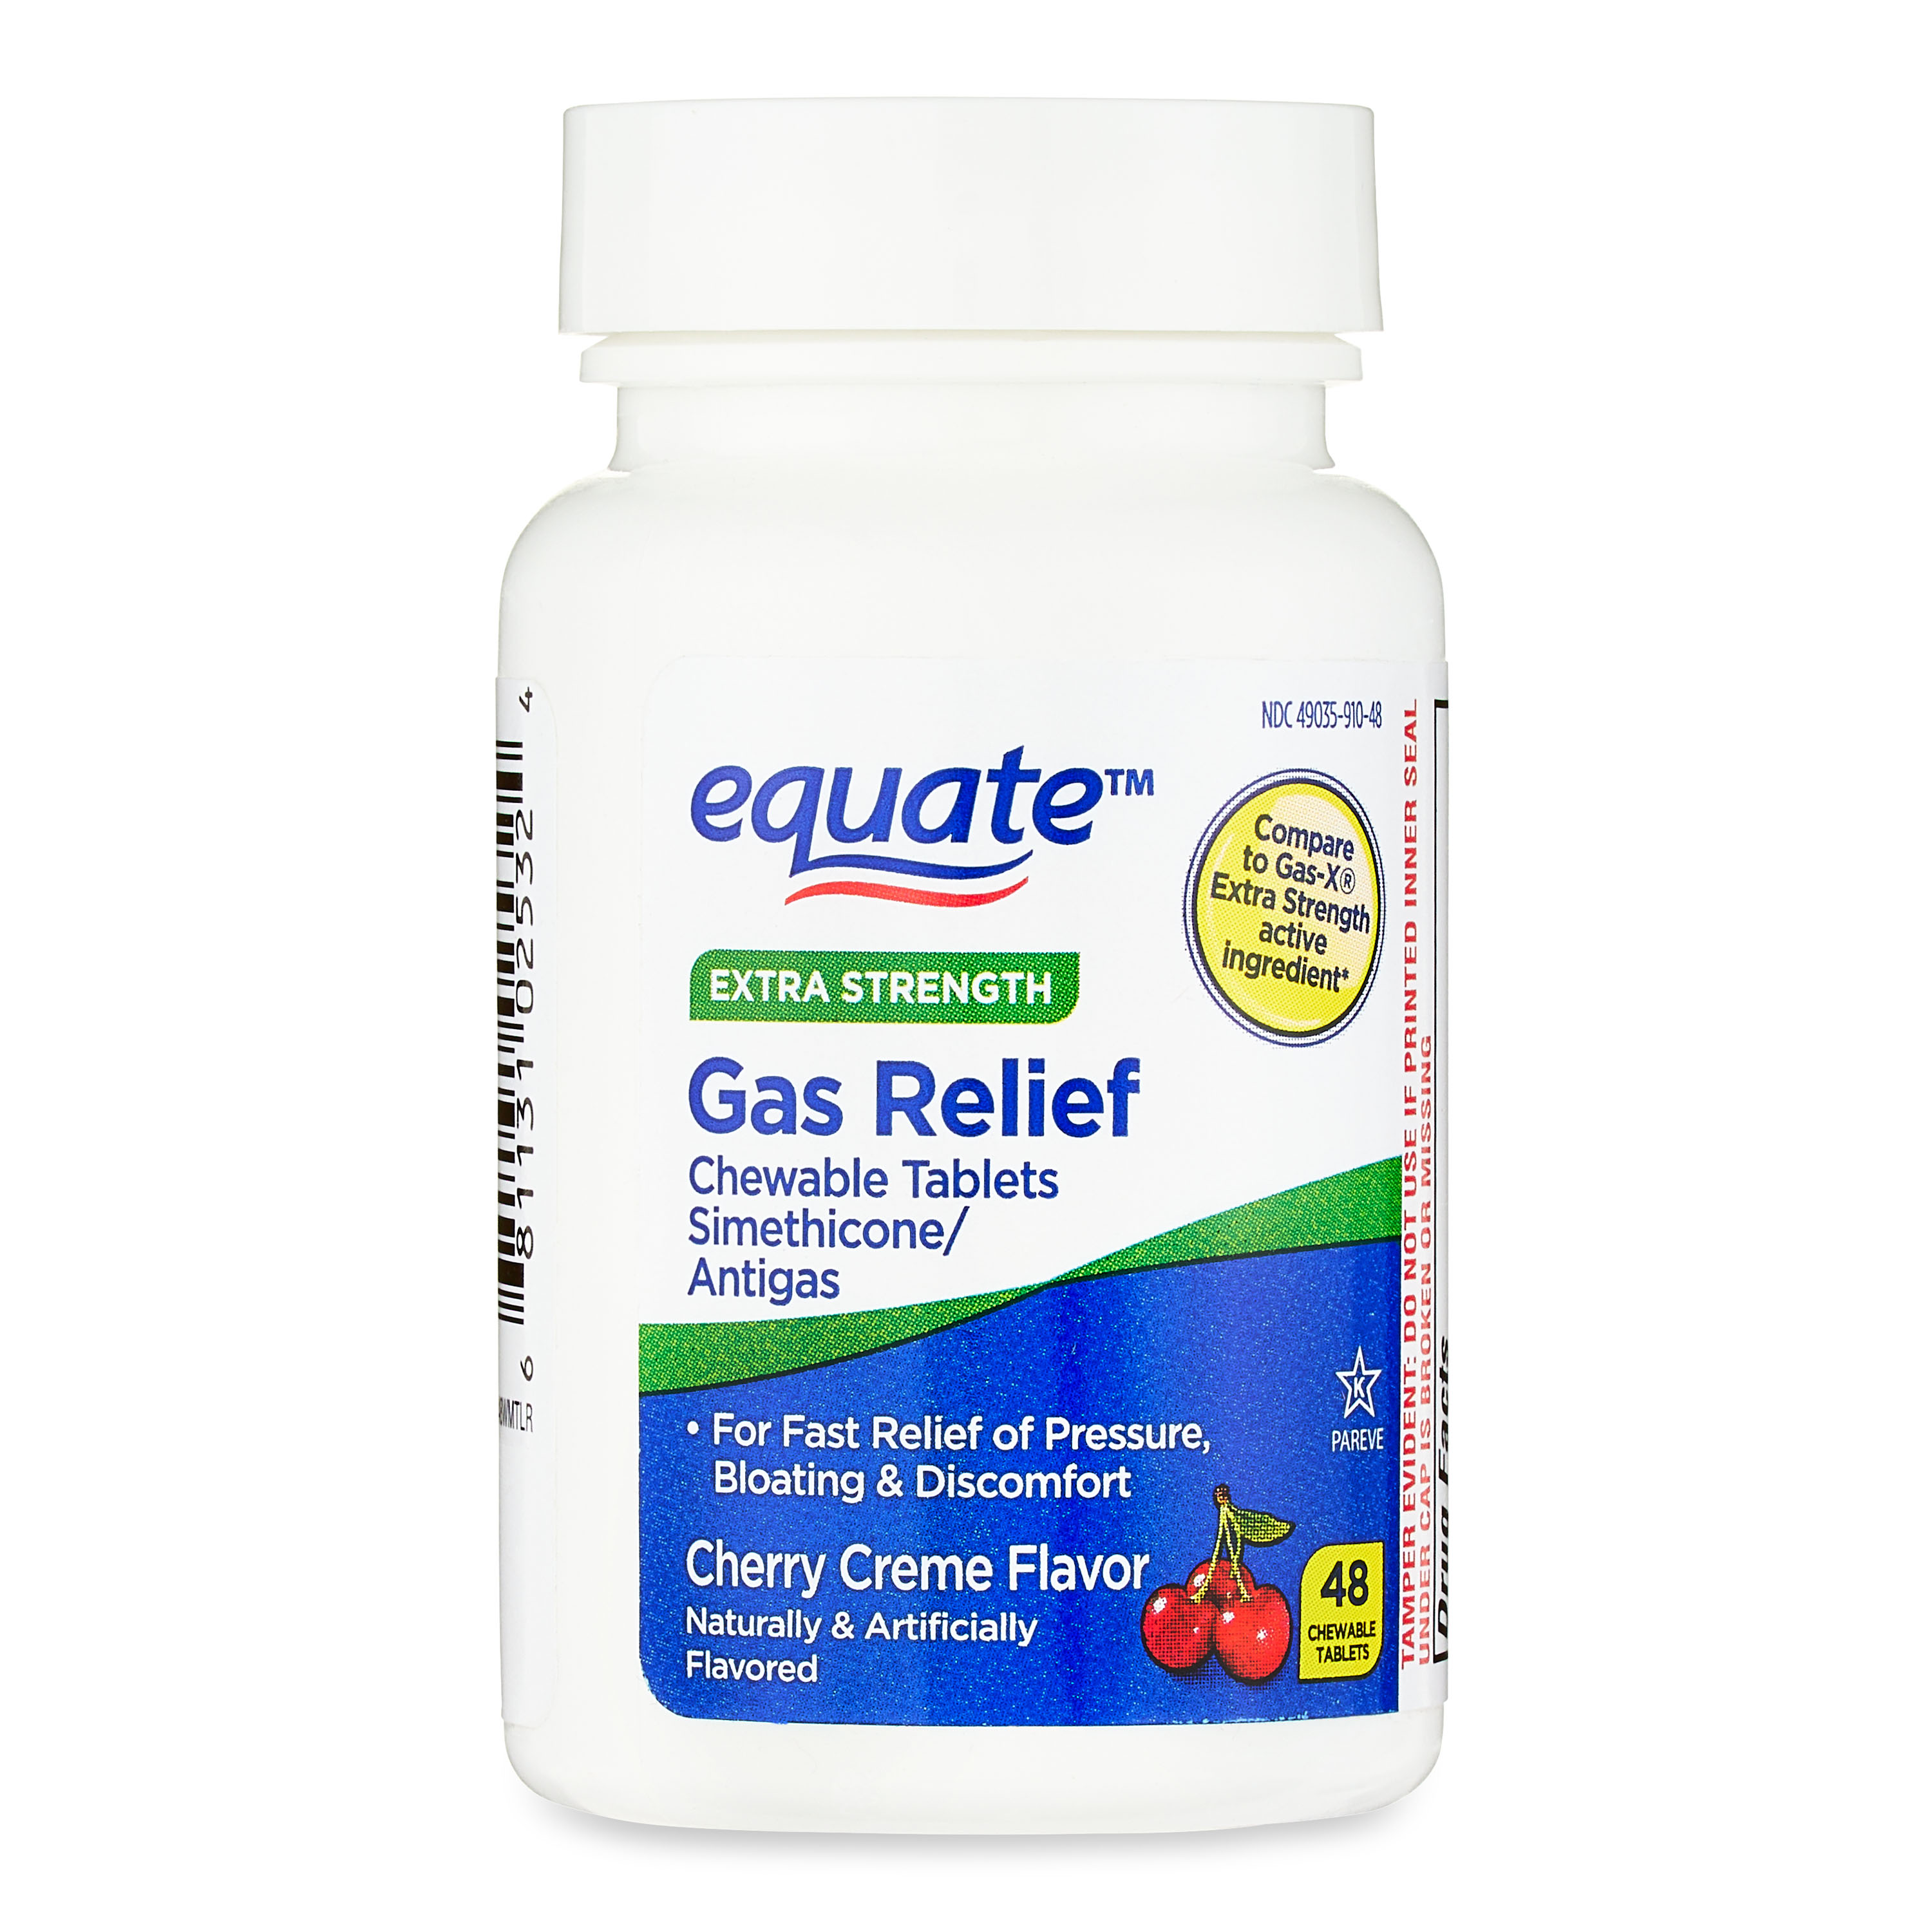 Equate Extra Strength Gas Relief Chewable Tablets, Cherry Creme, 48 Count - image 1 of 13